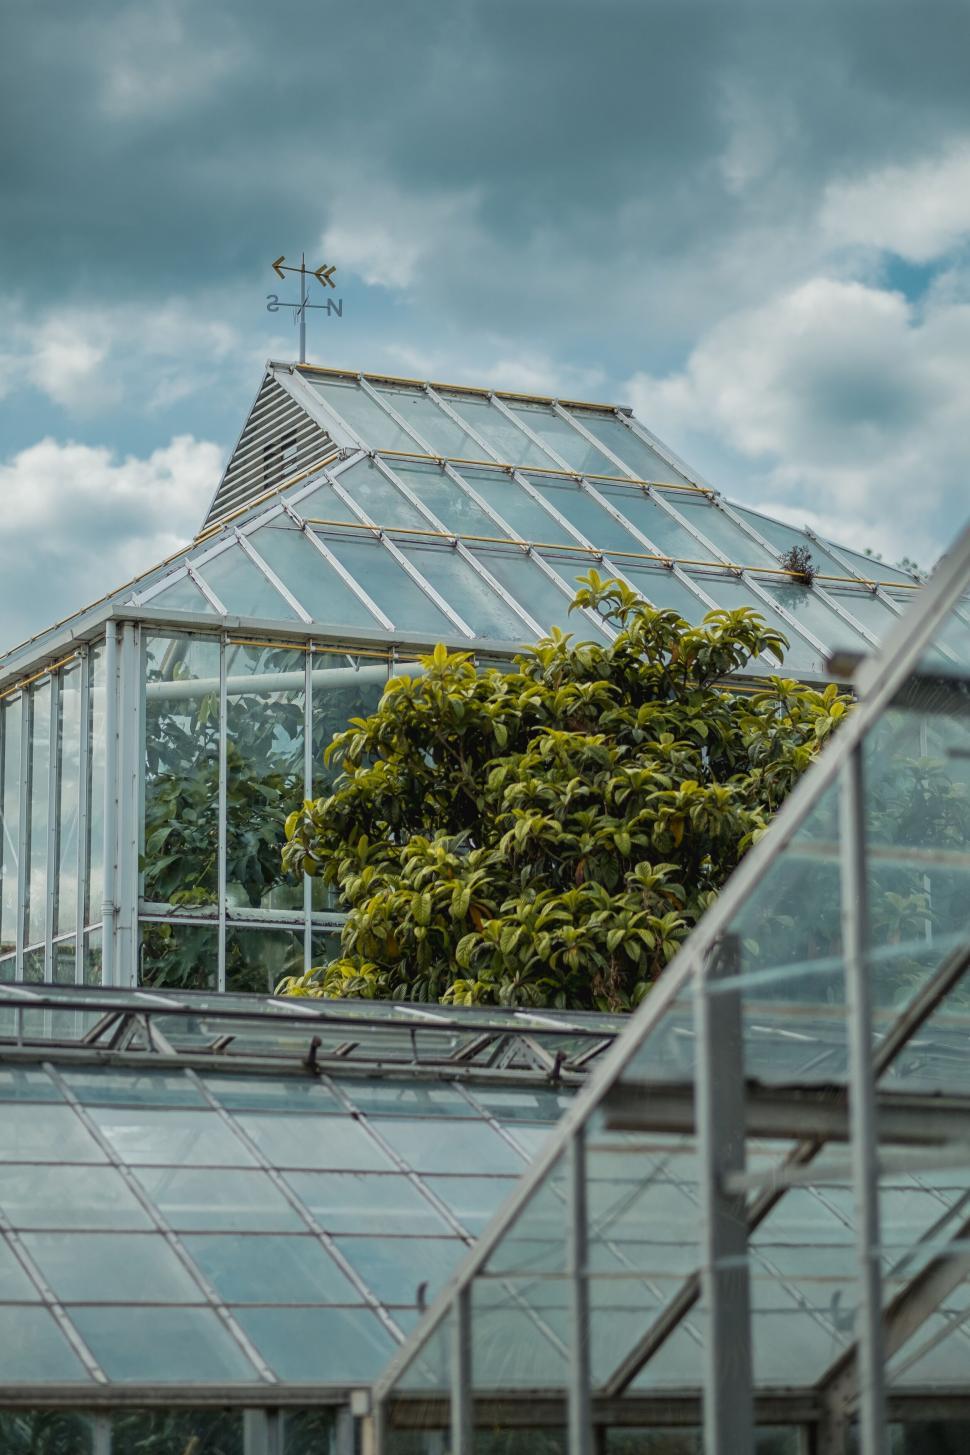 Free Image of Glasshouse with lush greenery and weather vane 